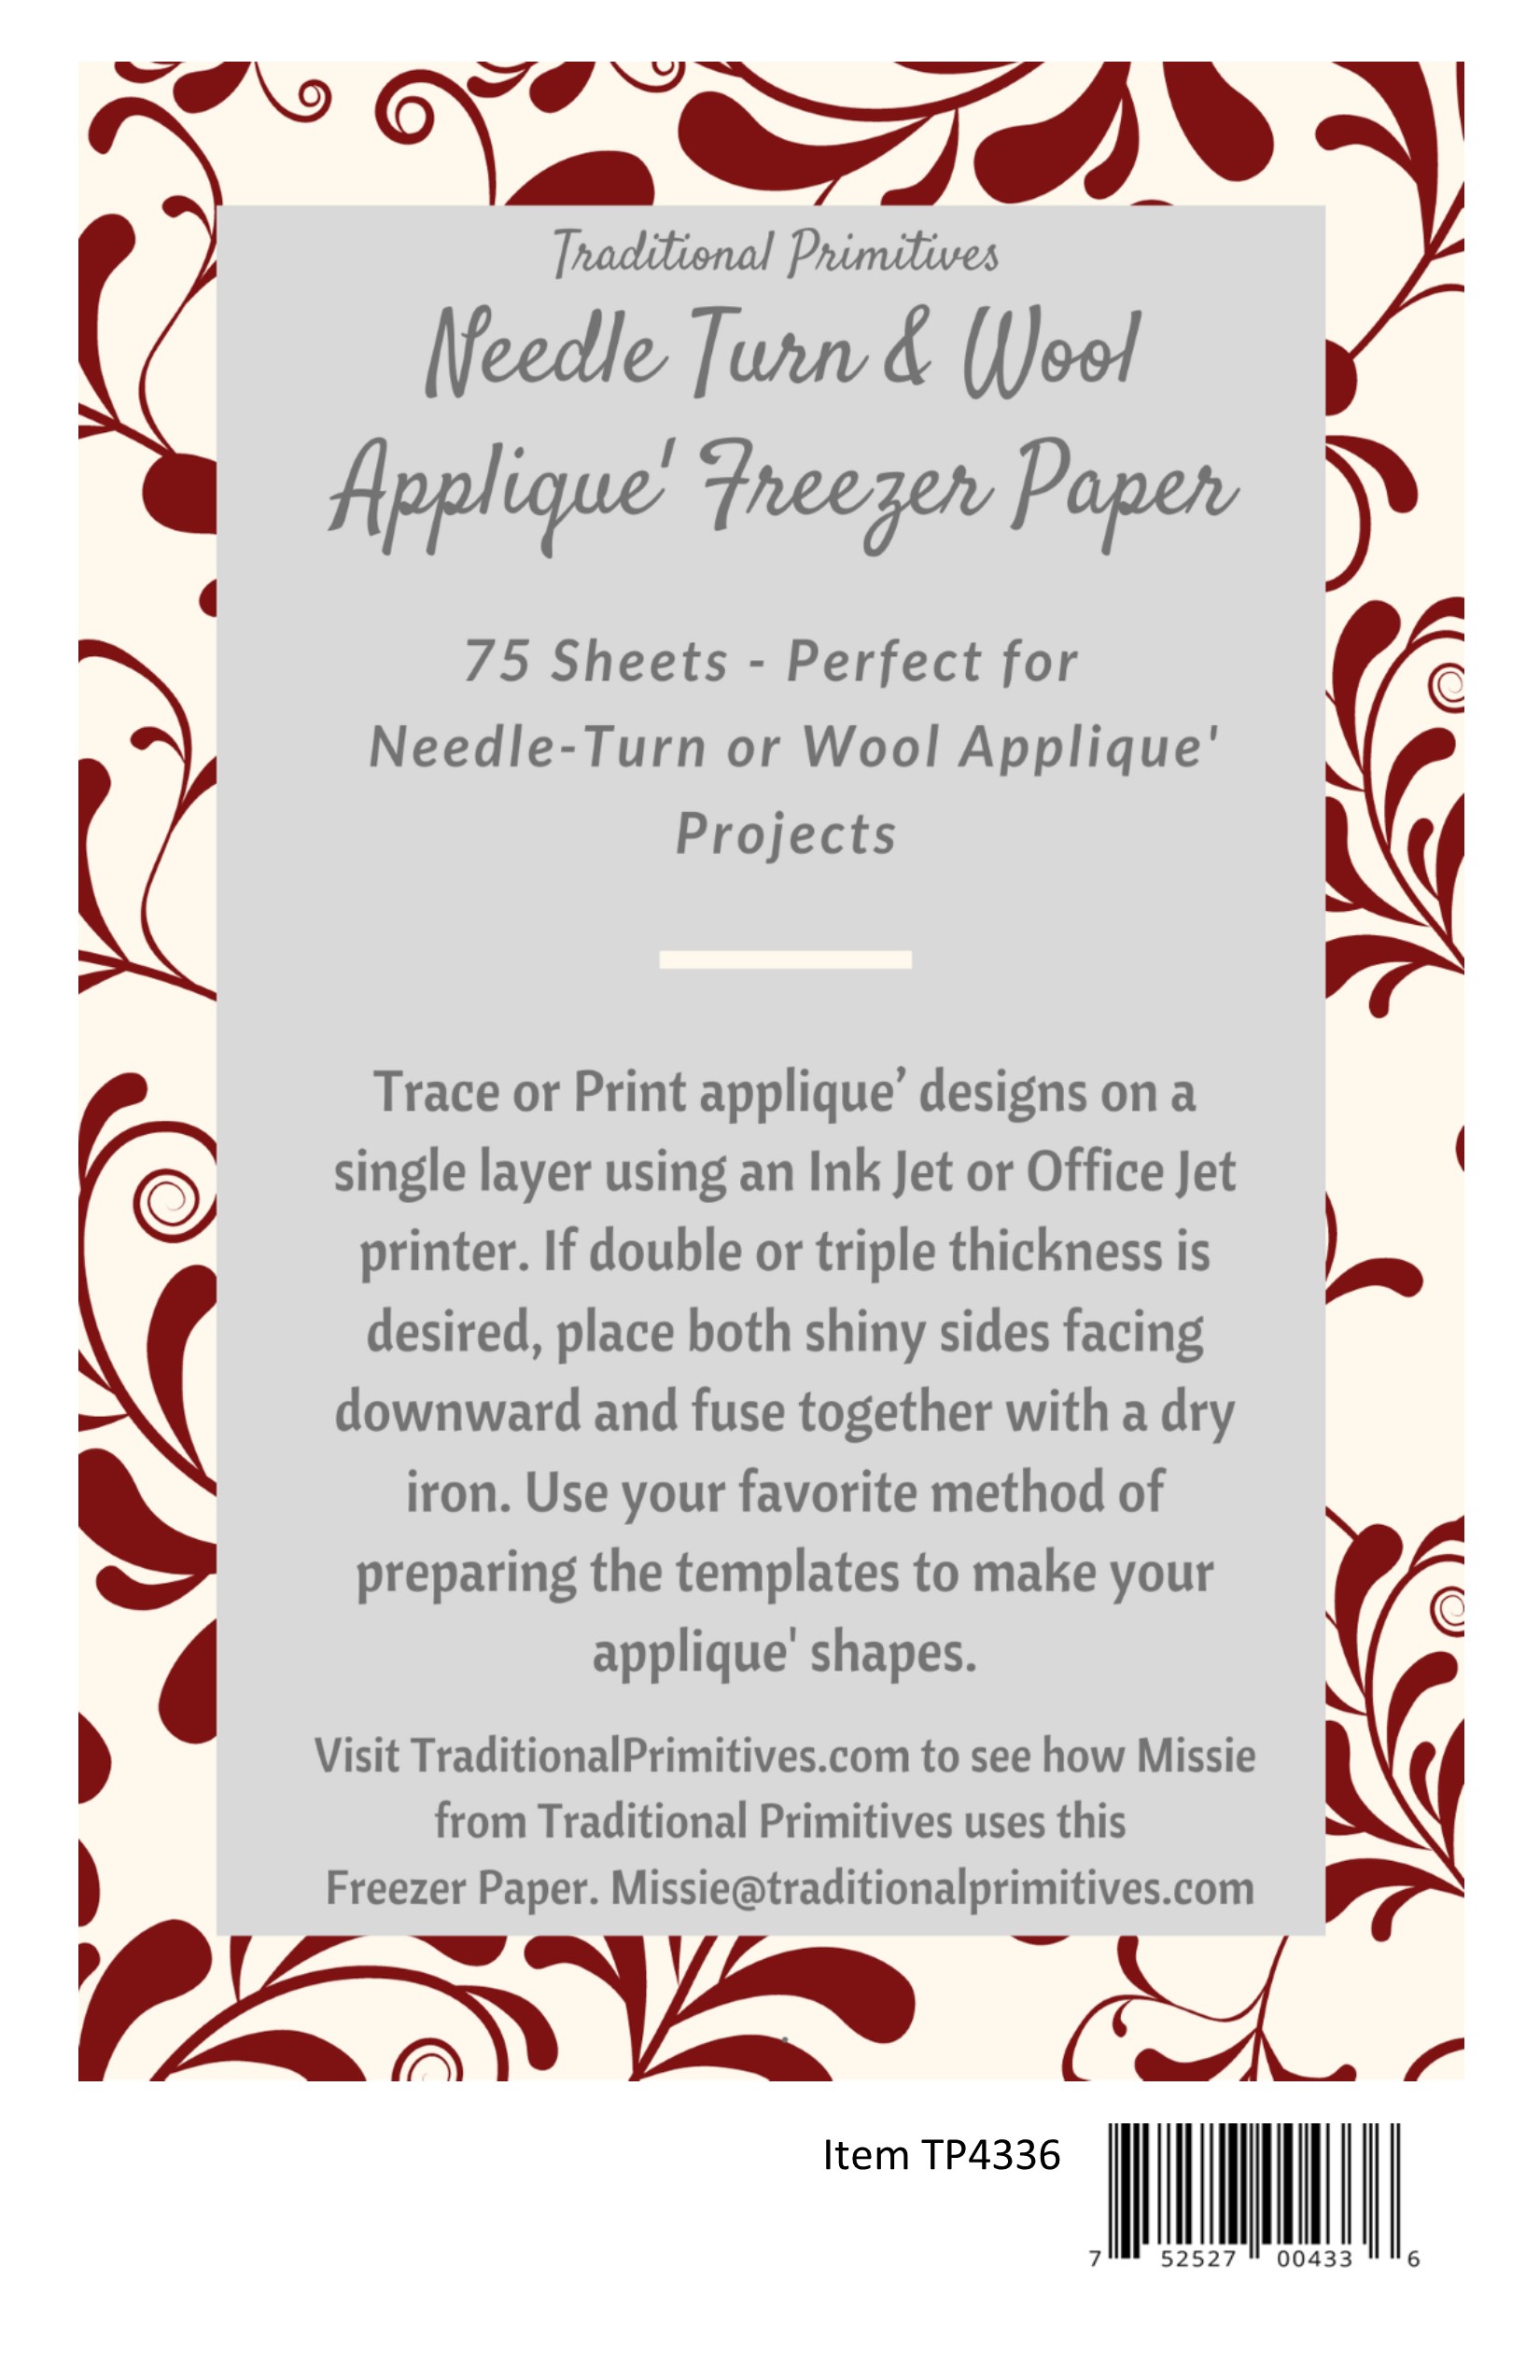 Needle Turn and Wool Applique' Freezer Paper - Traditional Primitives